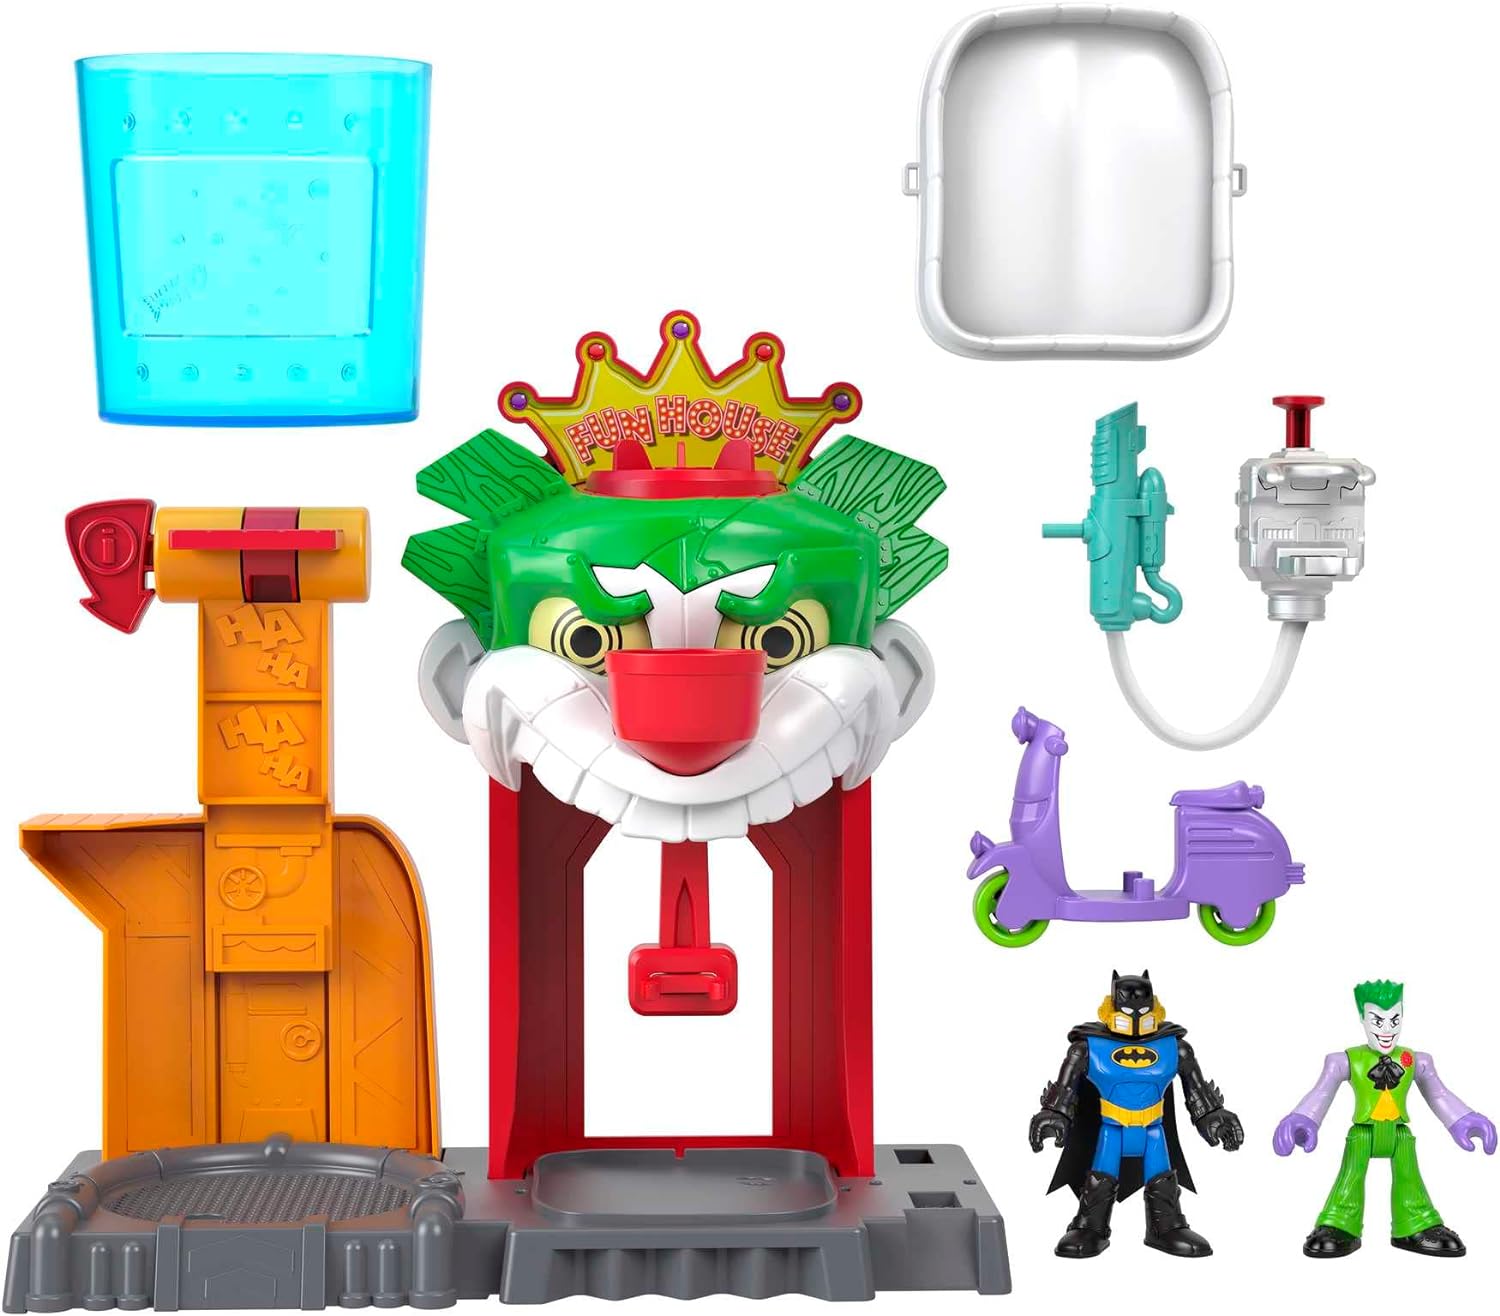 Fisher-Price Imaginext DC Super Friends Batman Toy – Only $7.99!